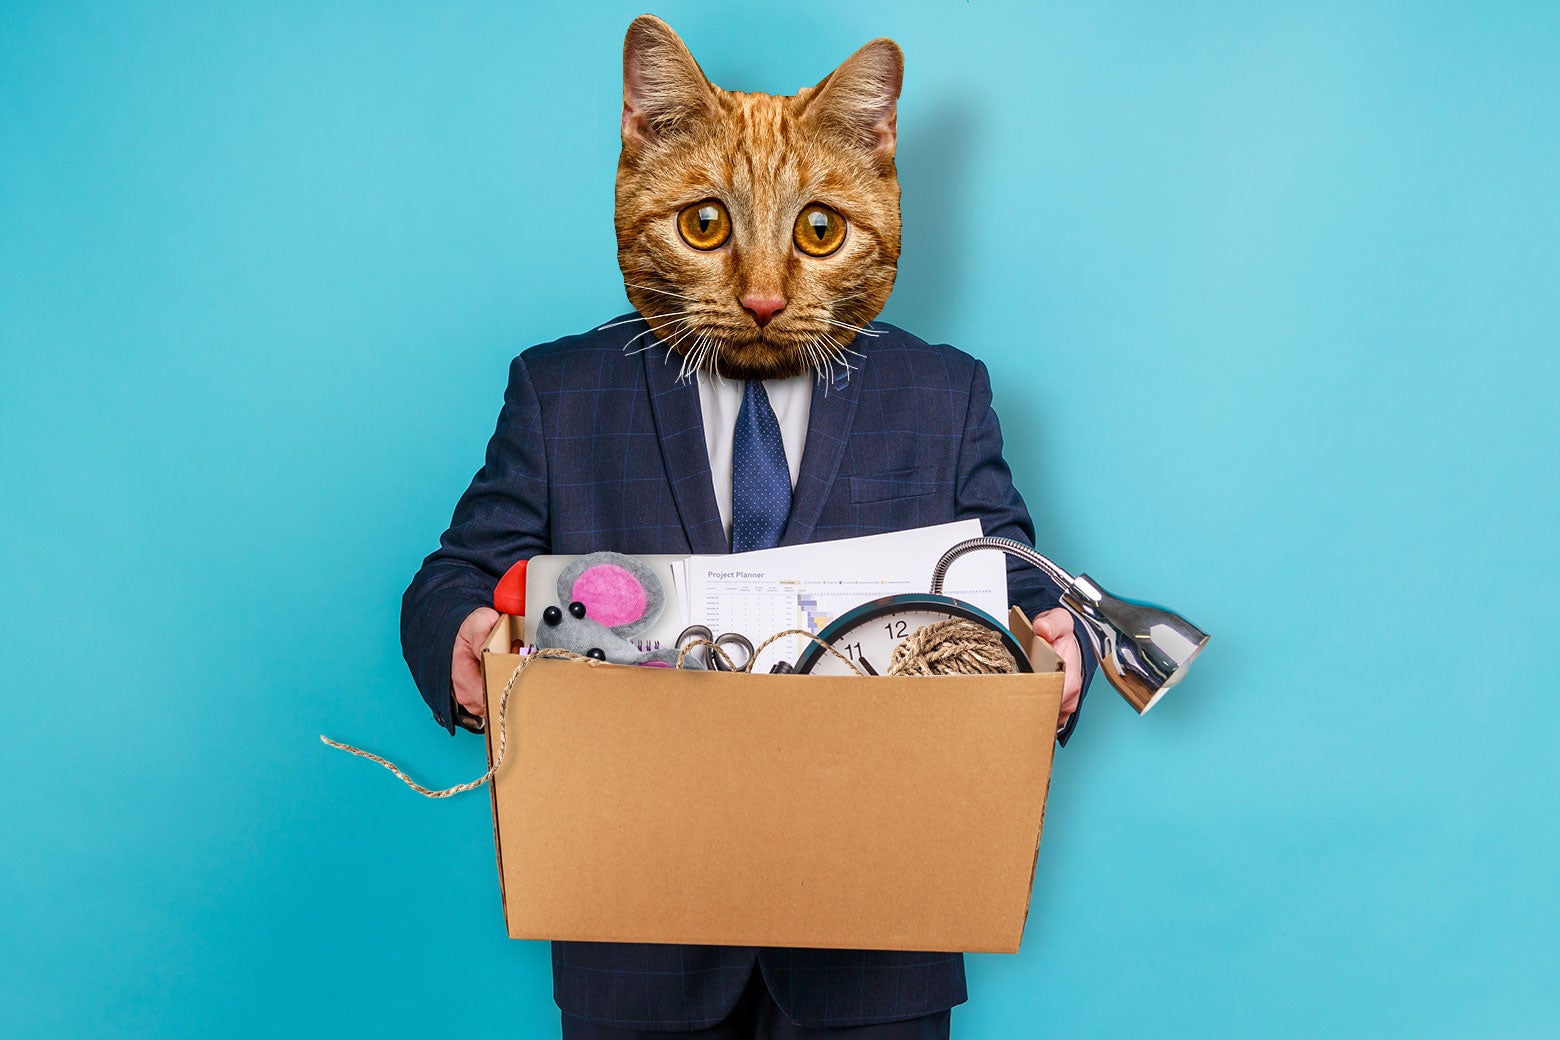 A cat in a suit looks sad as it holds a box of its toys and office supplies